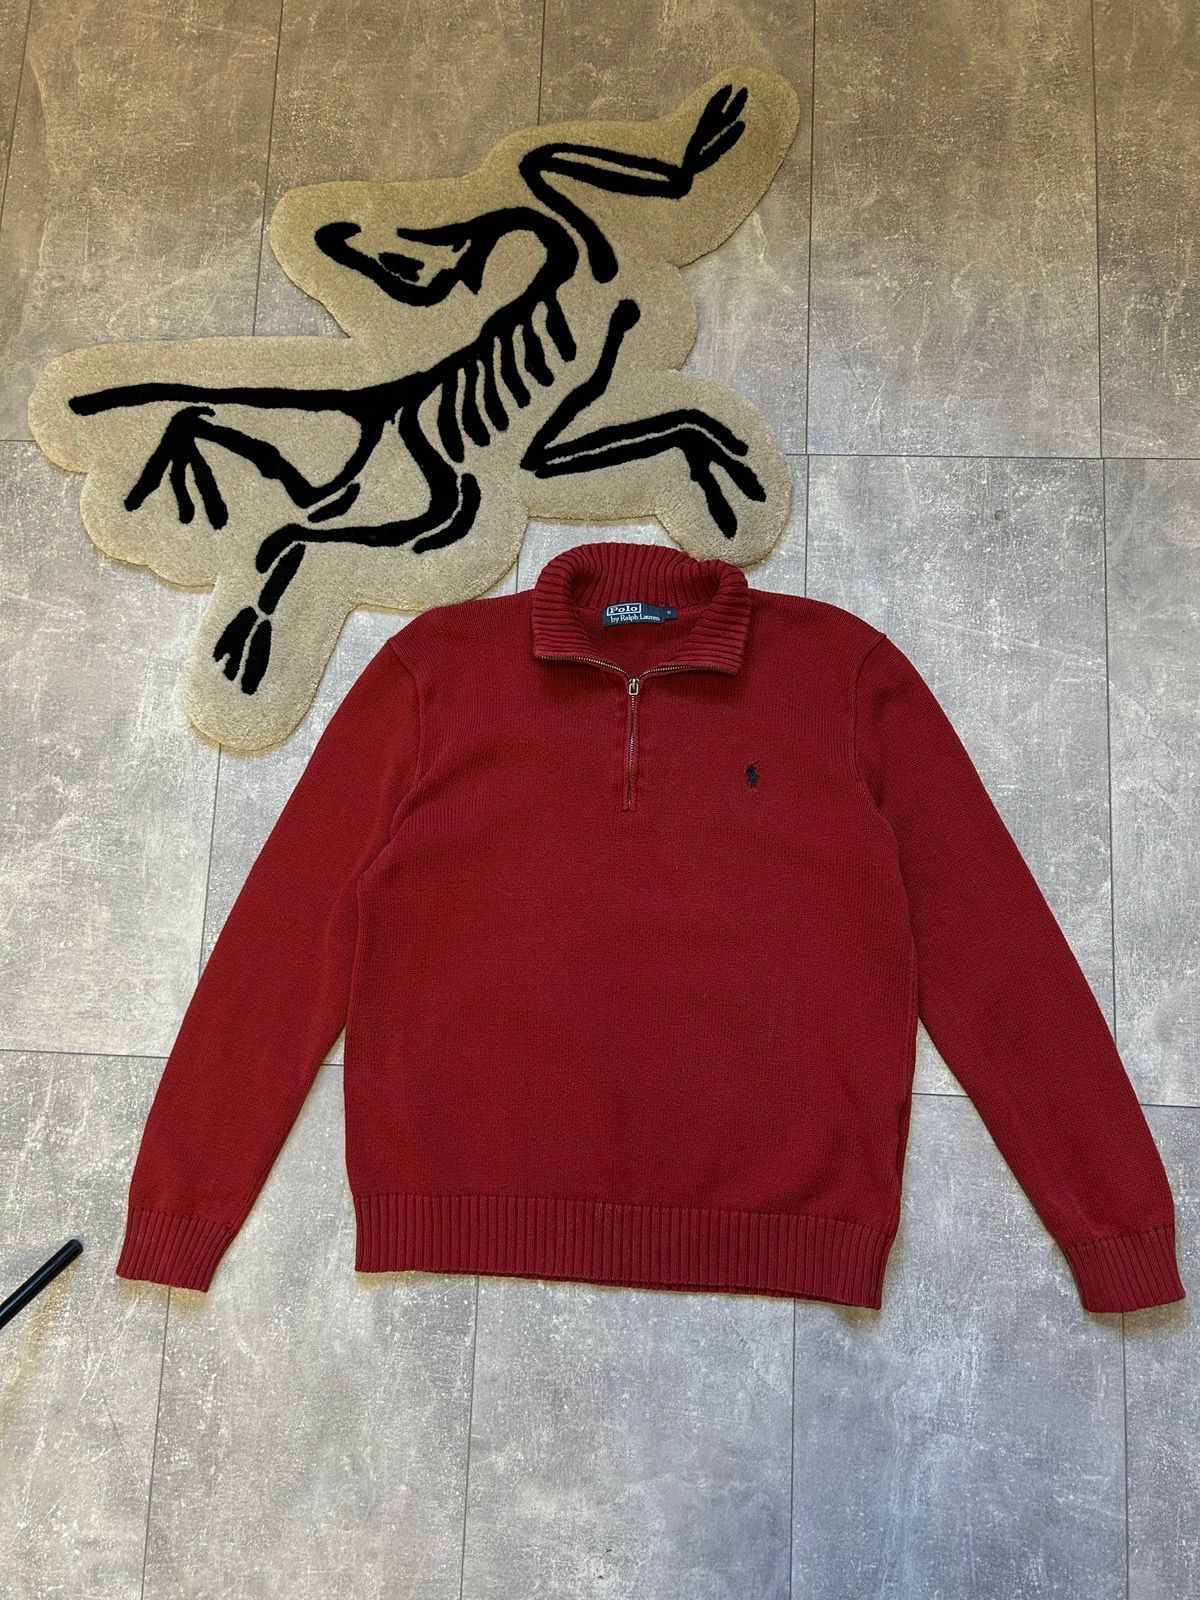 Pre-owned Polo Ralph Lauren X Vintage Mens Vintage Polo Ralph Laurent Knit Sweater Red Y2k 1/3 (size Small)